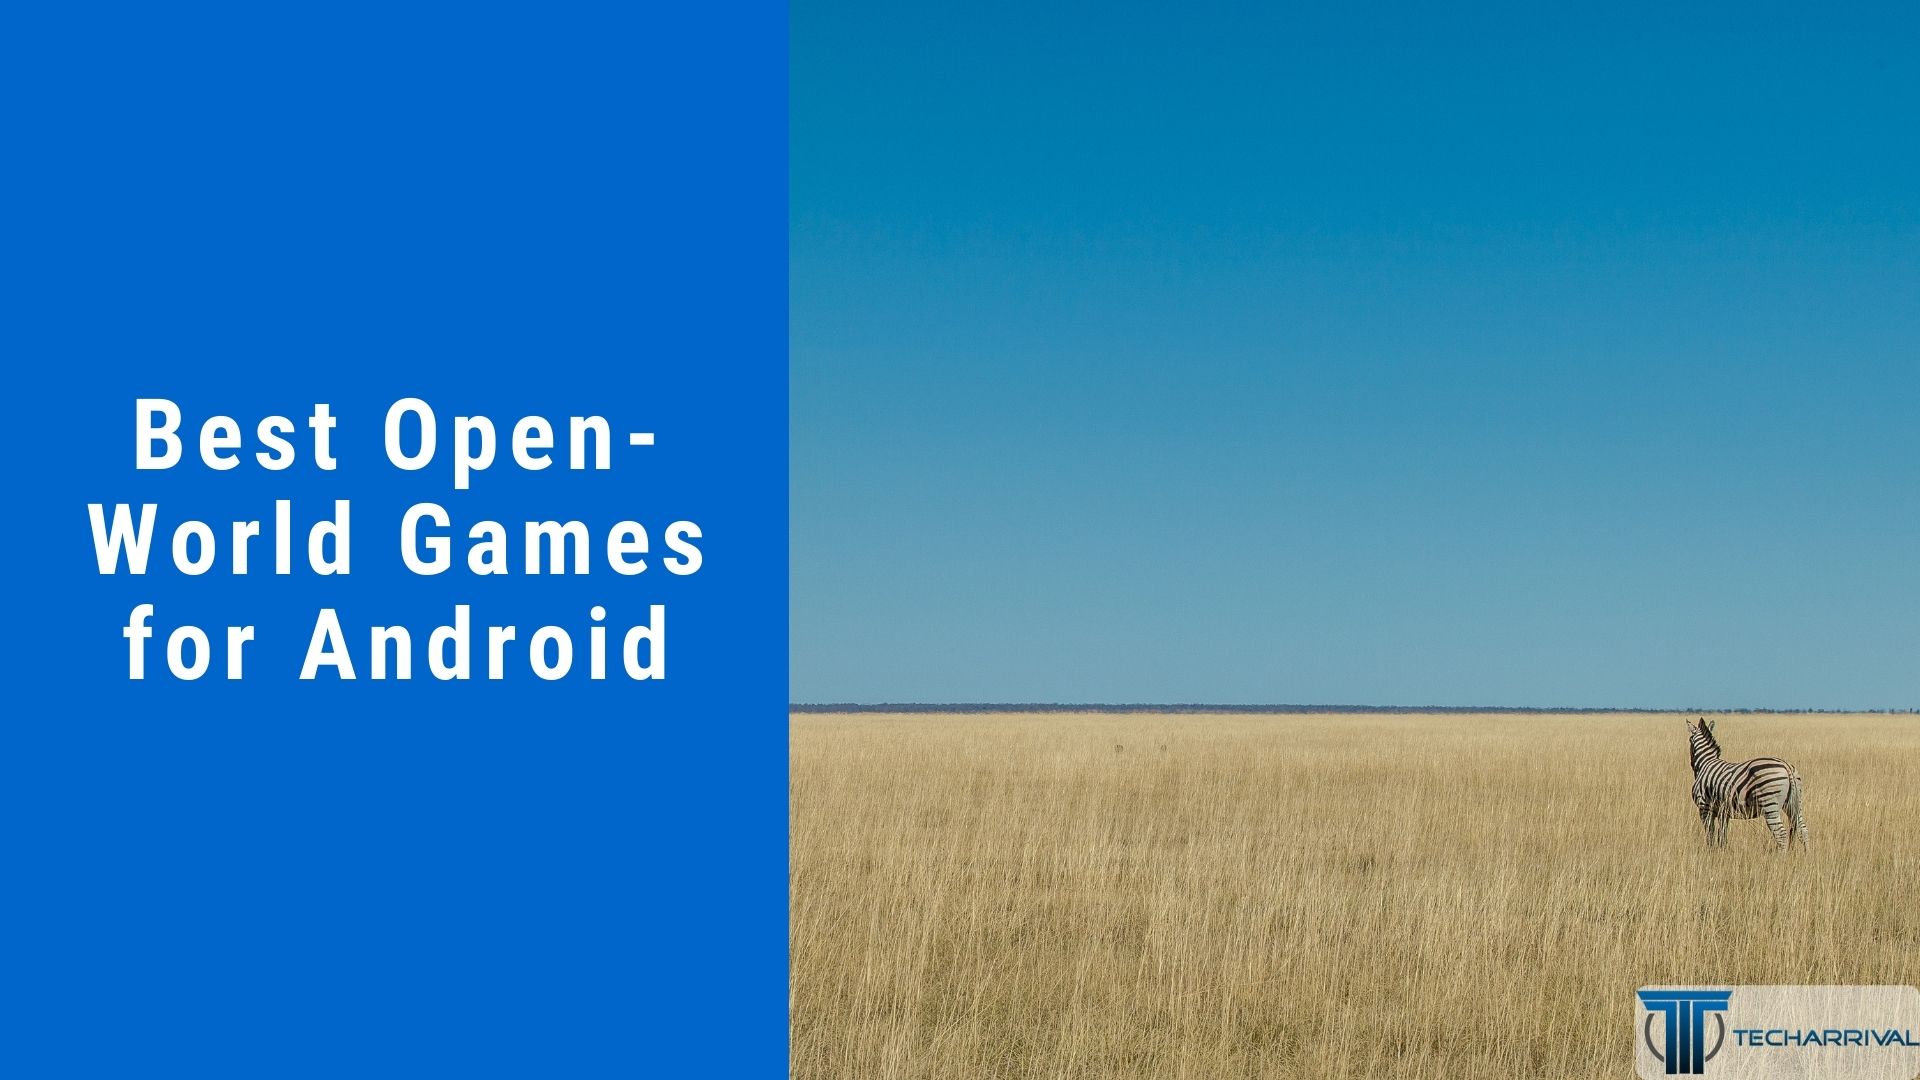 21 Best Open-World Games for Android (2022)